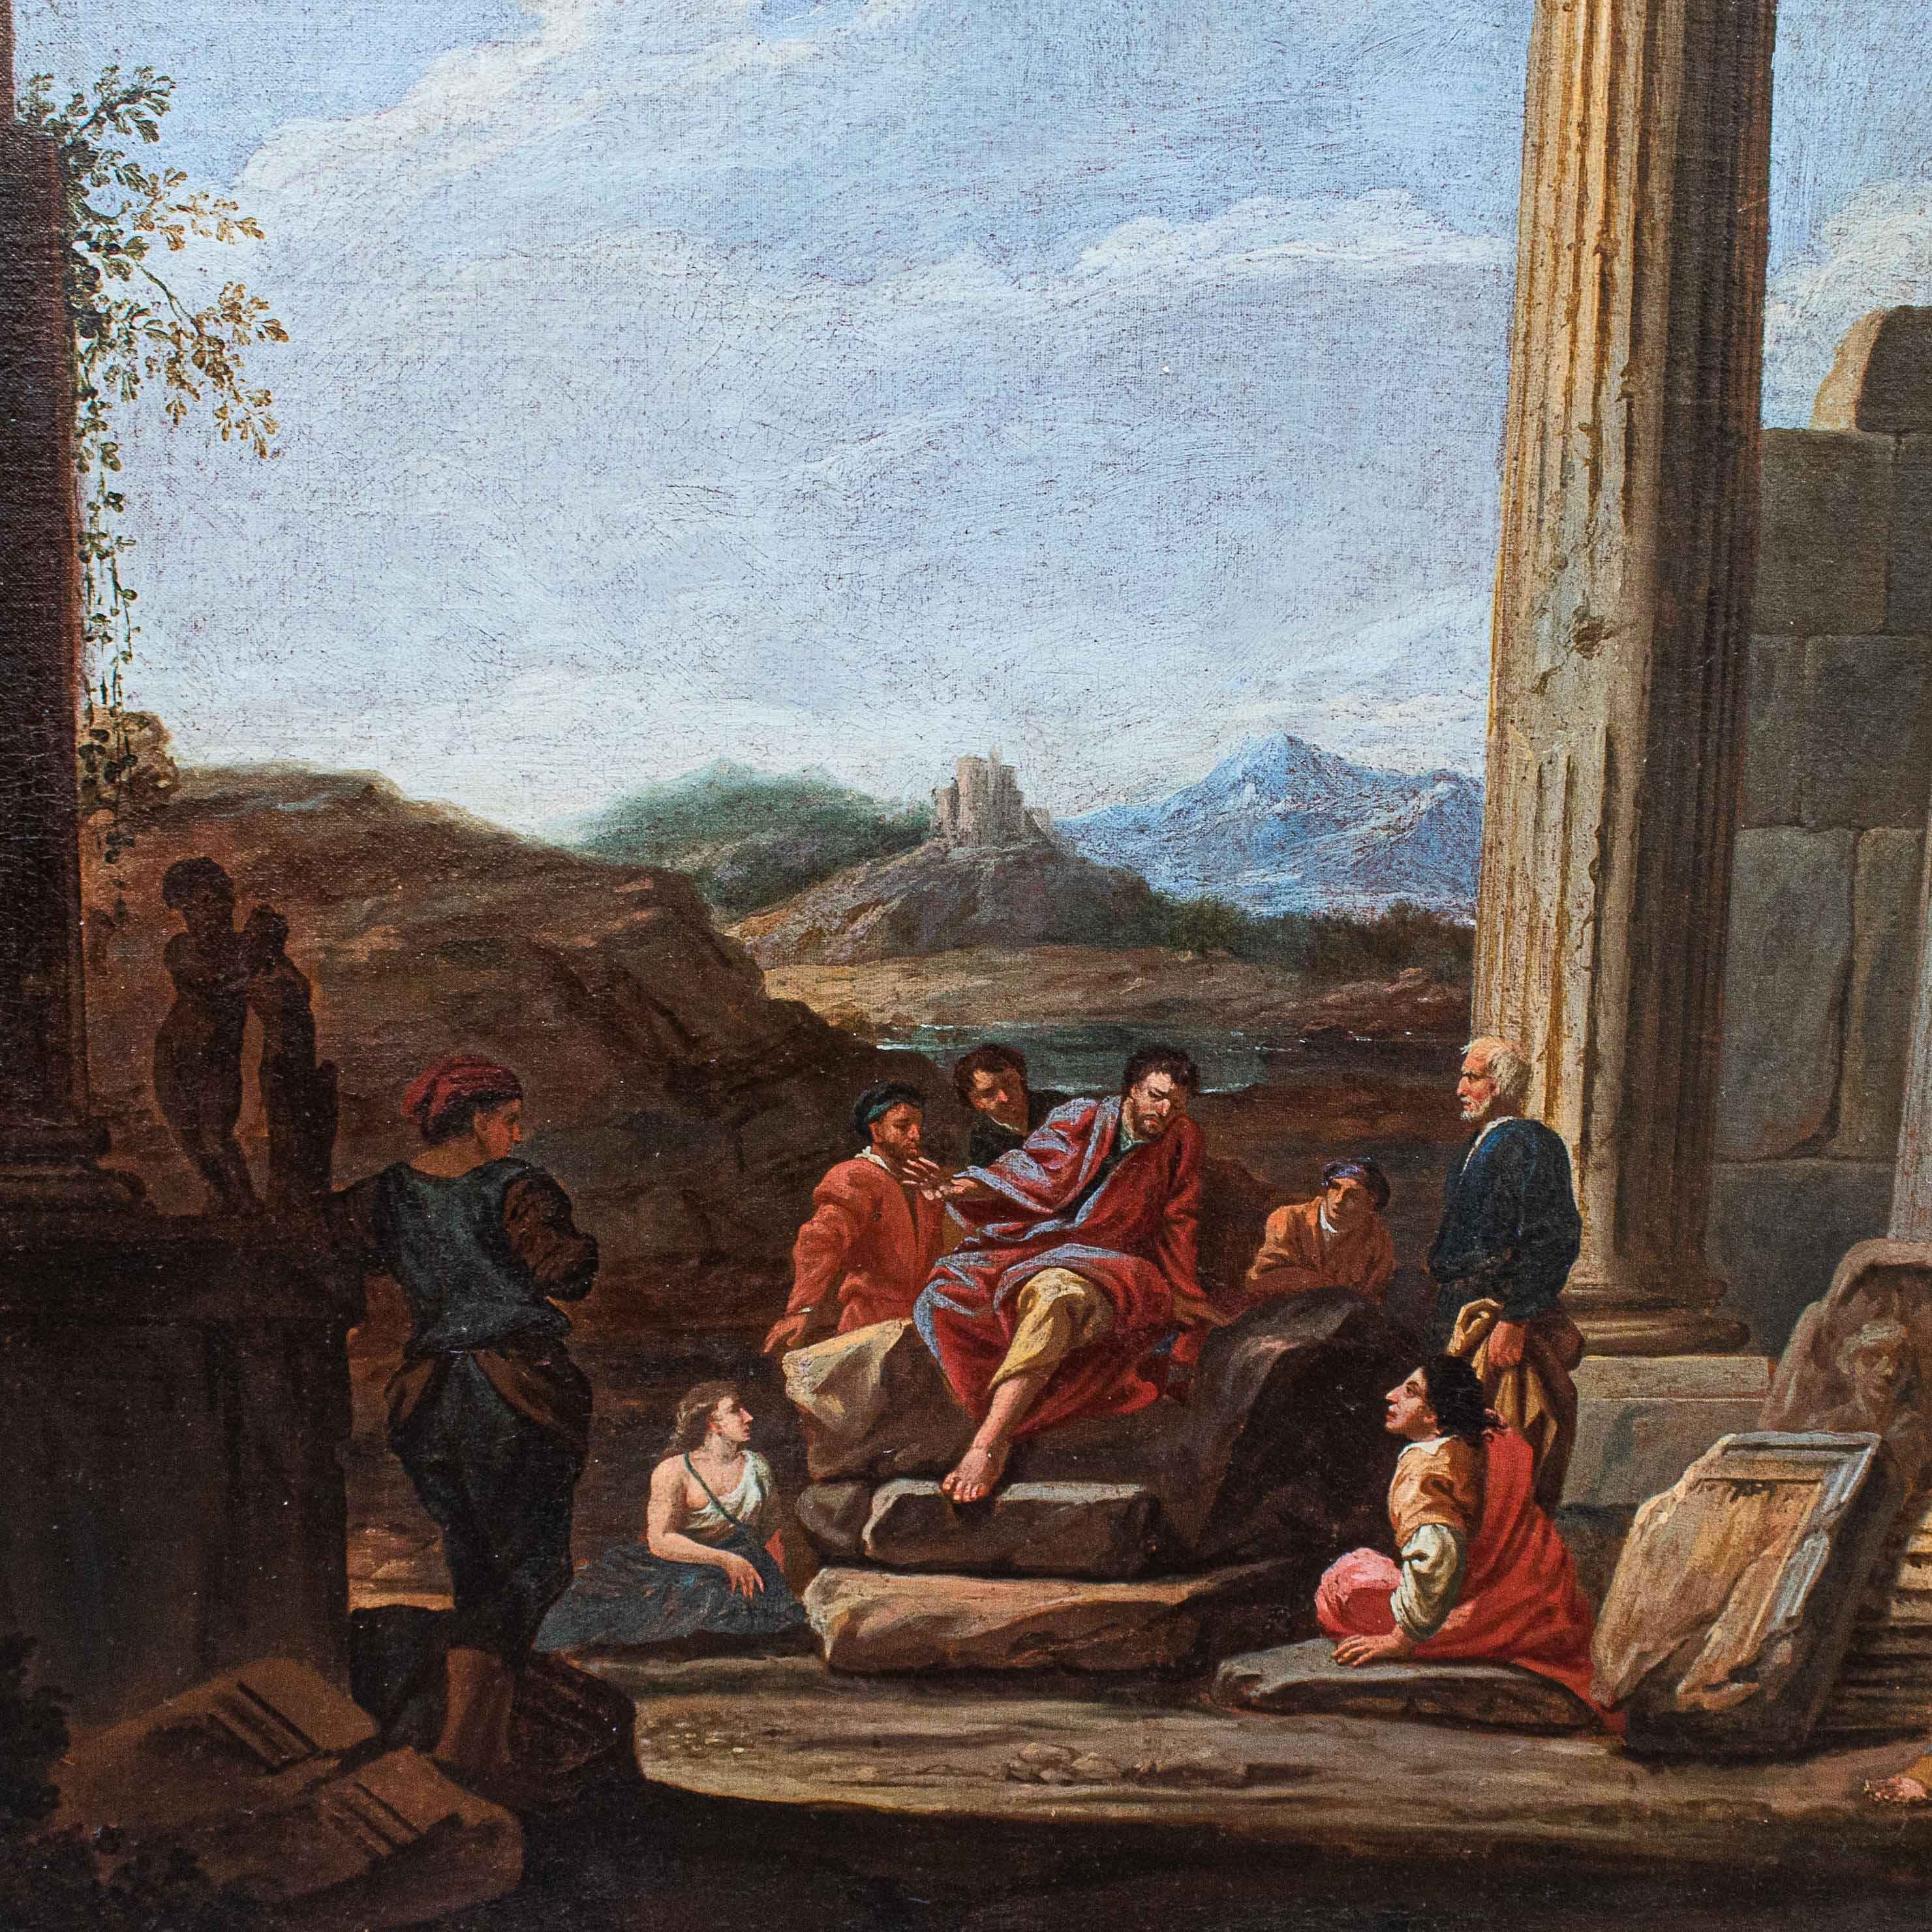 Domenico Roberti '1642-1707' Whims with Classical Ruins Paintings Oil on Canvas  8